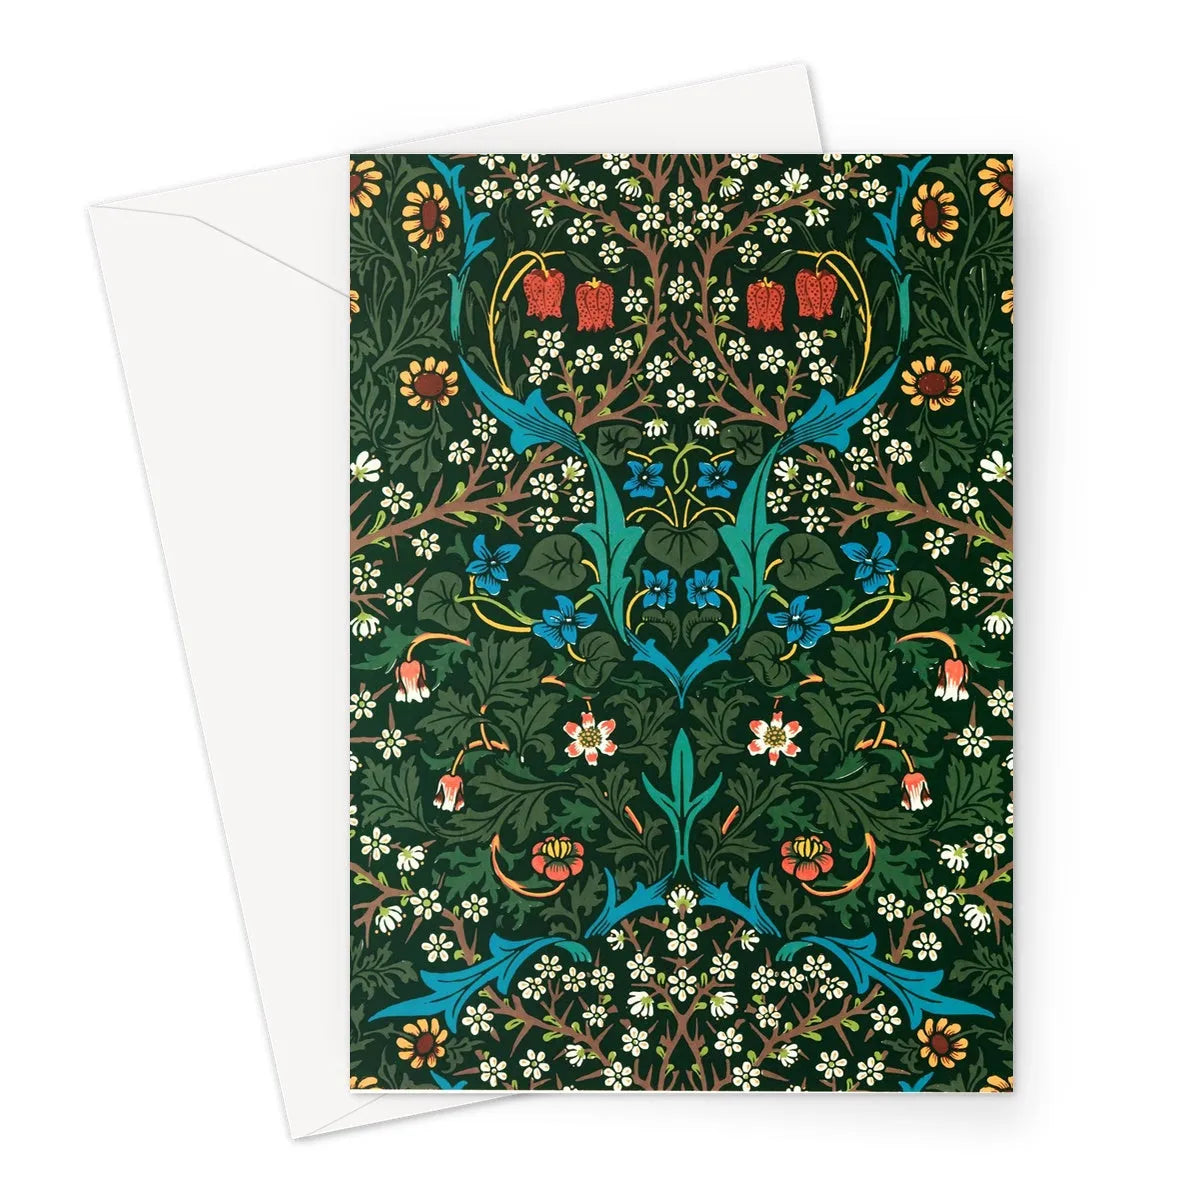 Tulips By William Morris Greeting Card - A5 Portrait / 1 Card - Greeting & Note Cards - Aesthetic Art